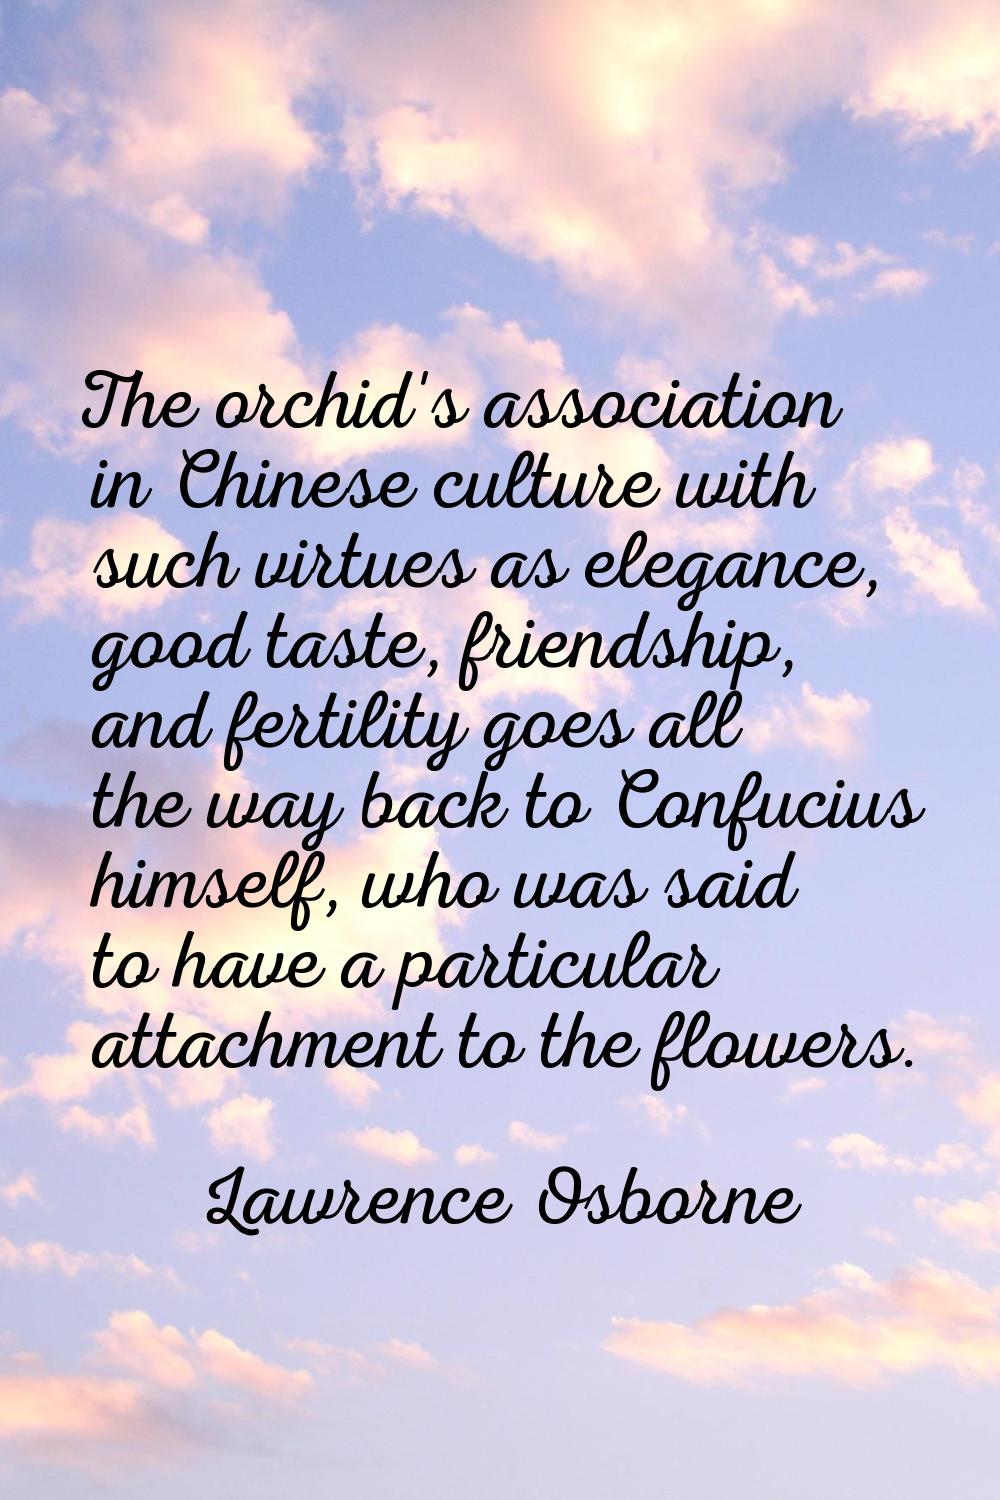 The orchid's association in Chinese culture with such virtues as elegance, good taste, friendship, 